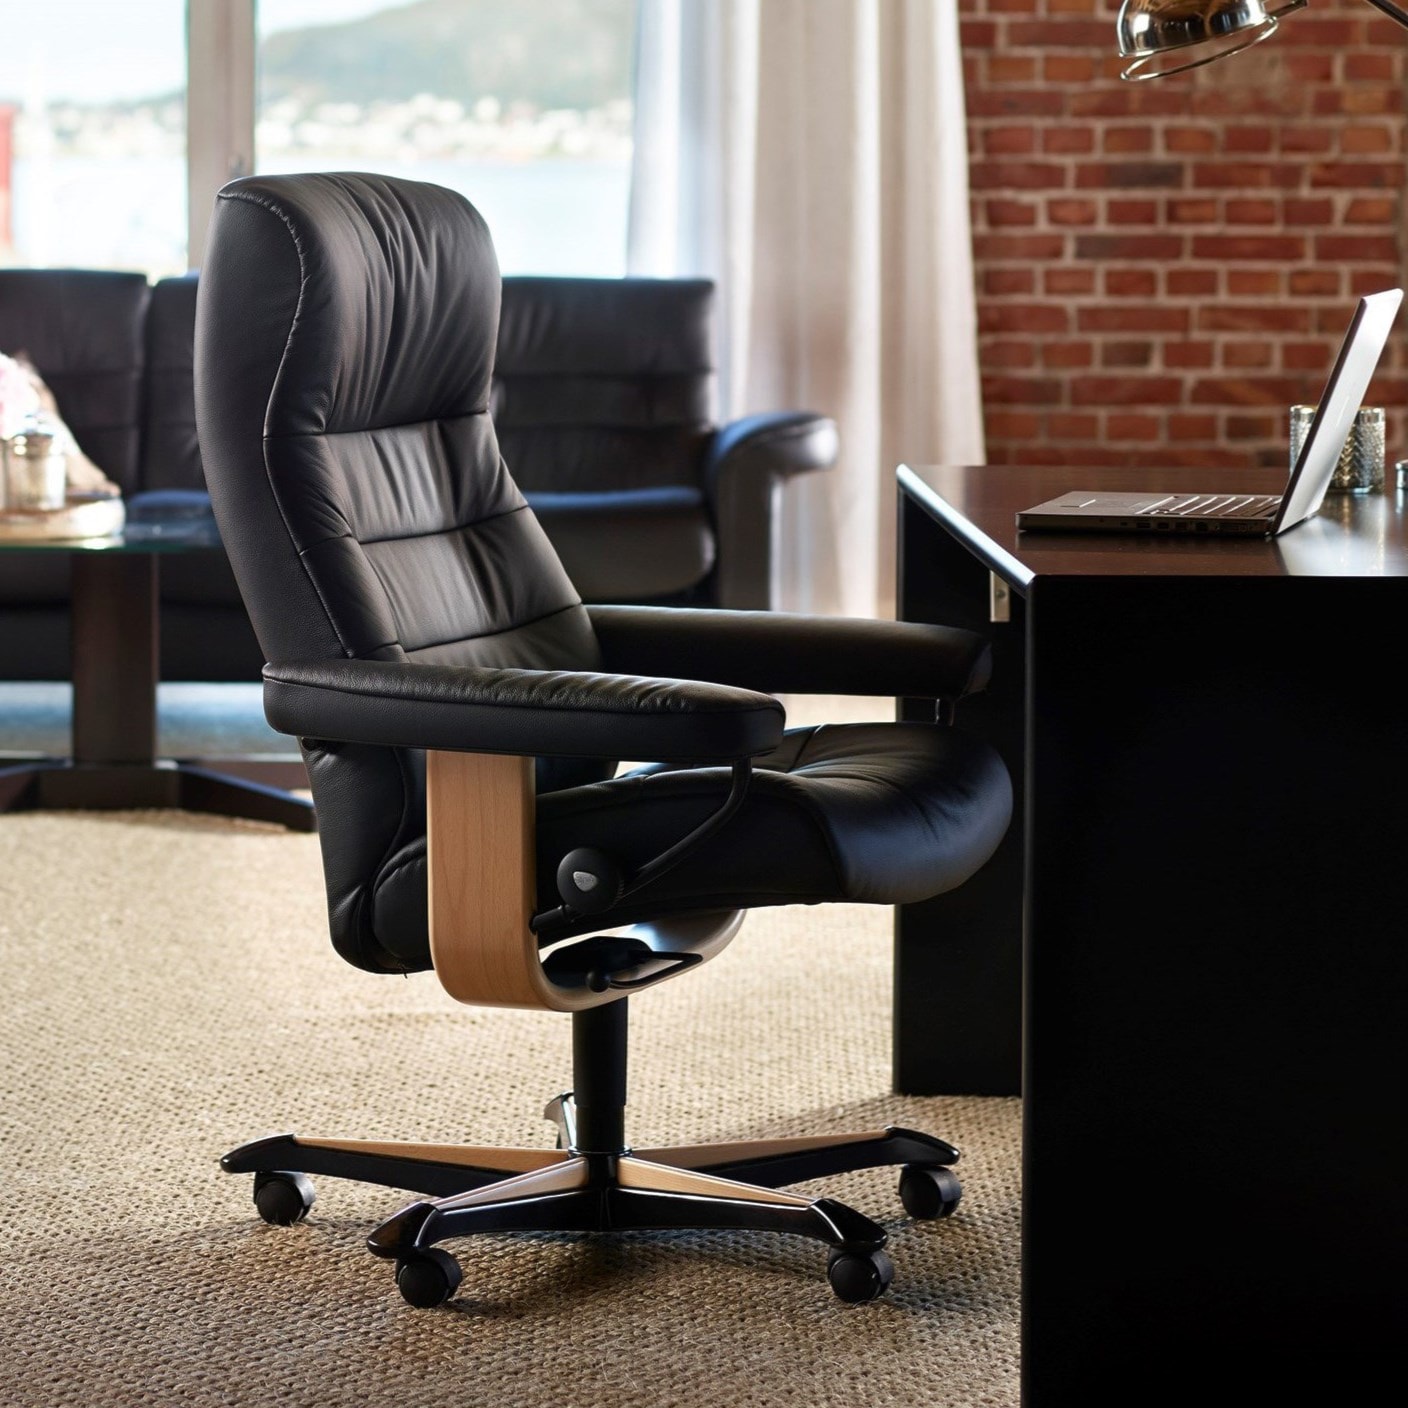 black office chair with wood accents